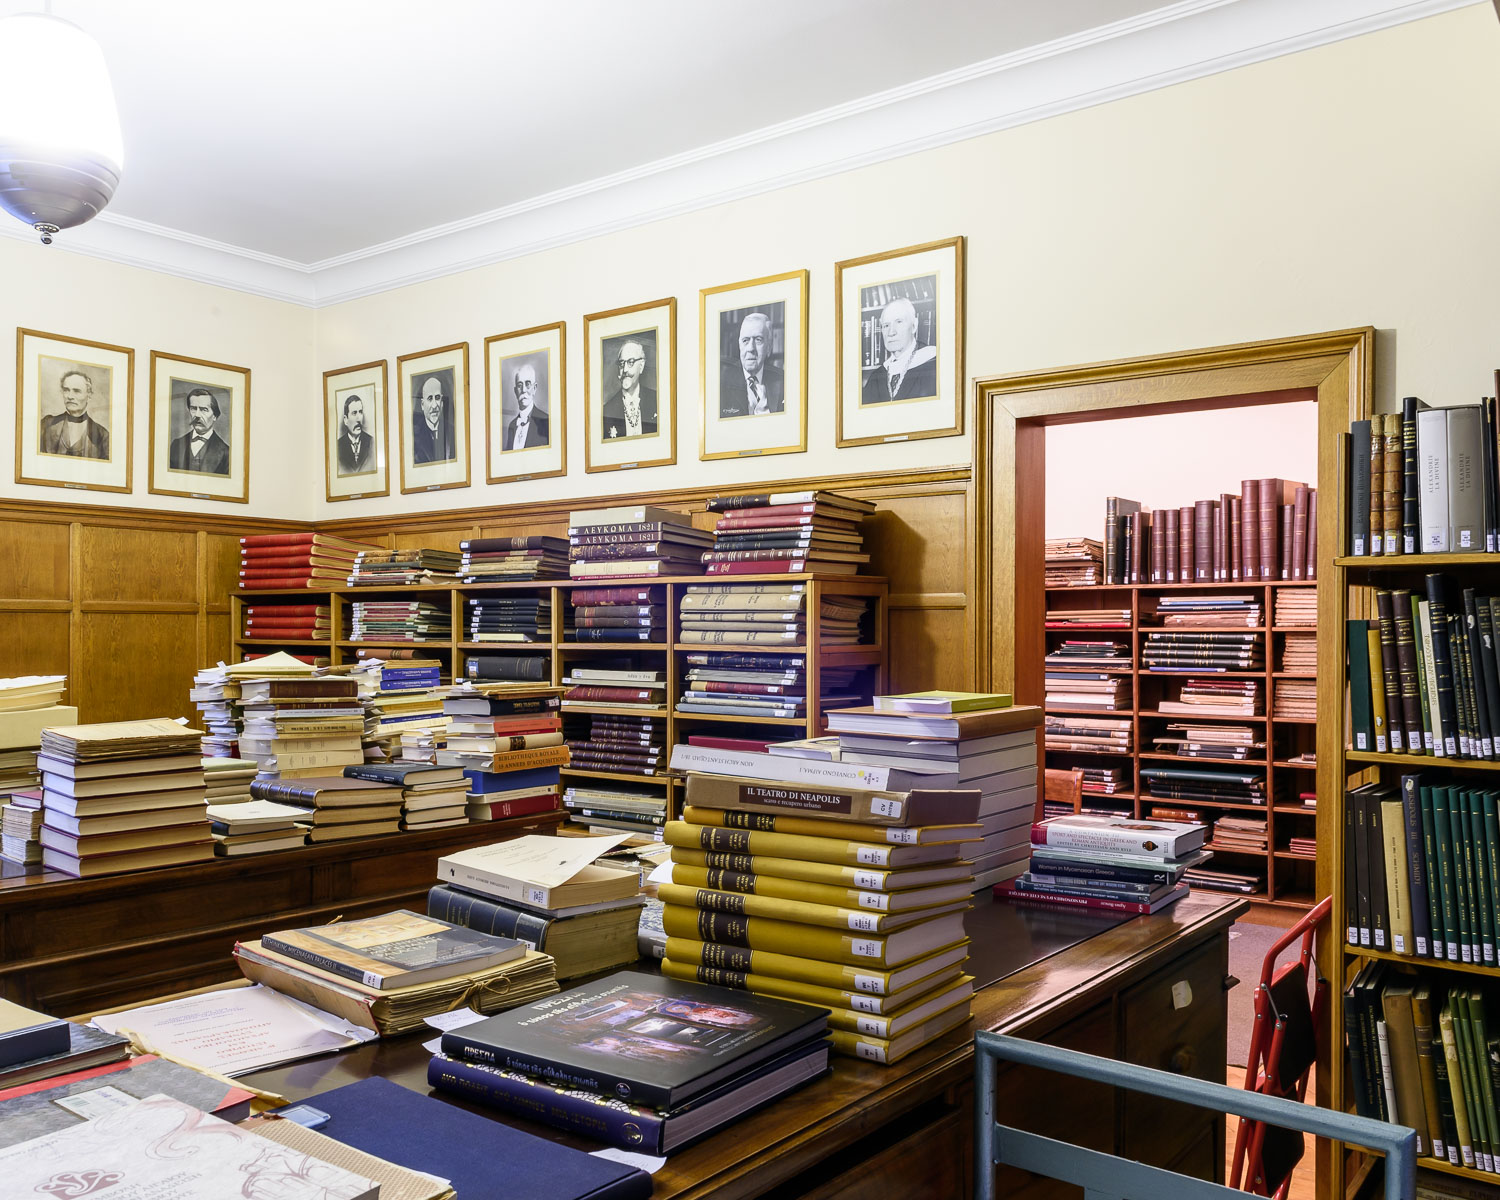  The Library at the Archeological Society at Athens, founded in 1837 